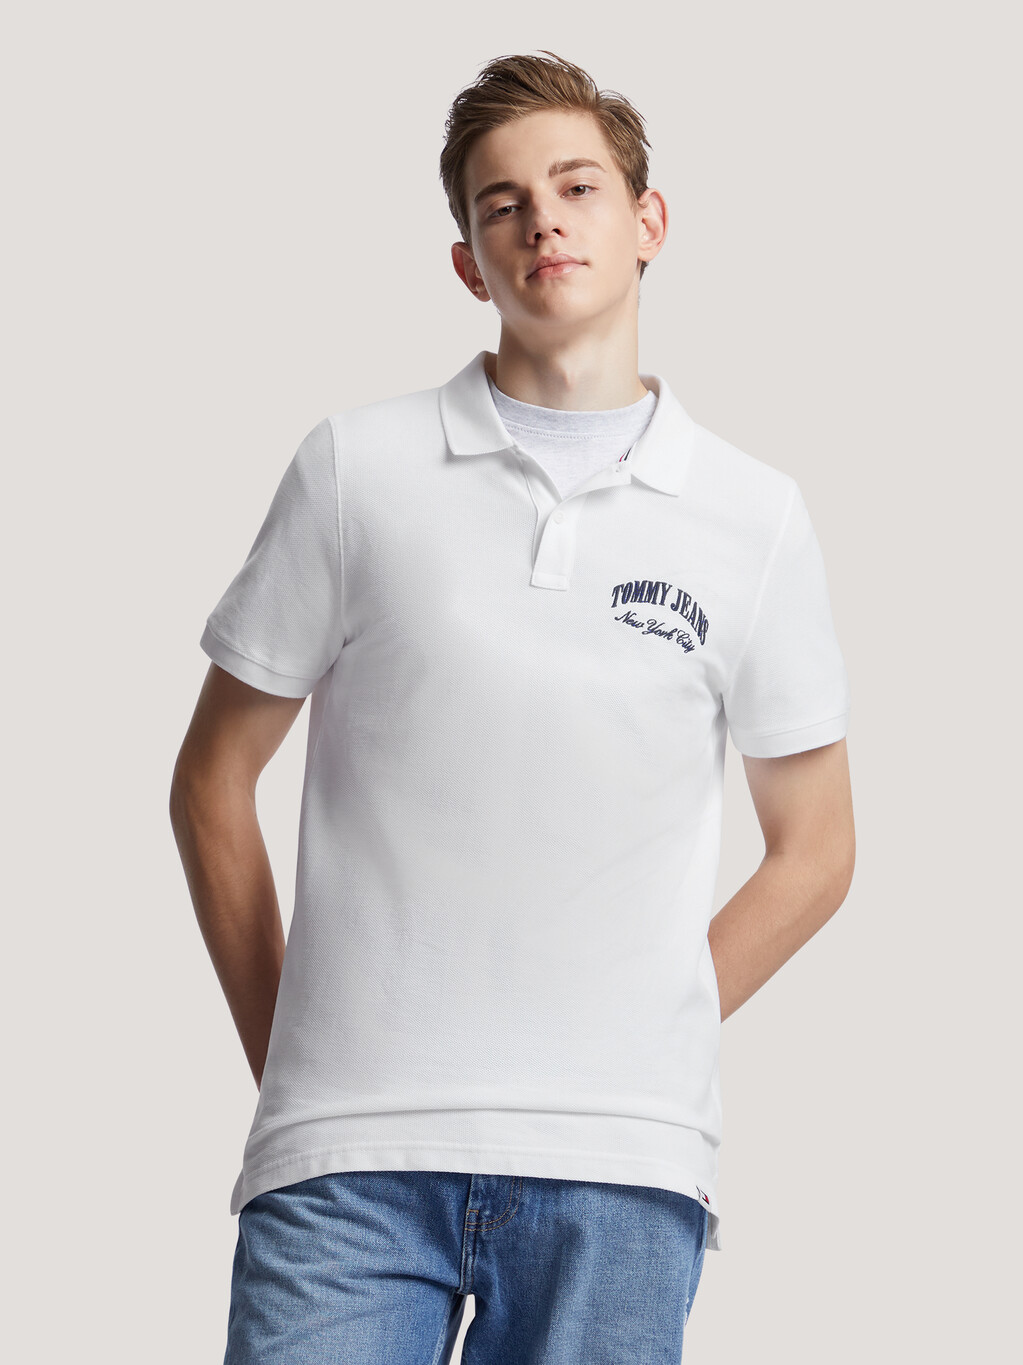 Tommy Jeans NYC Polo 衫, White, hi-res